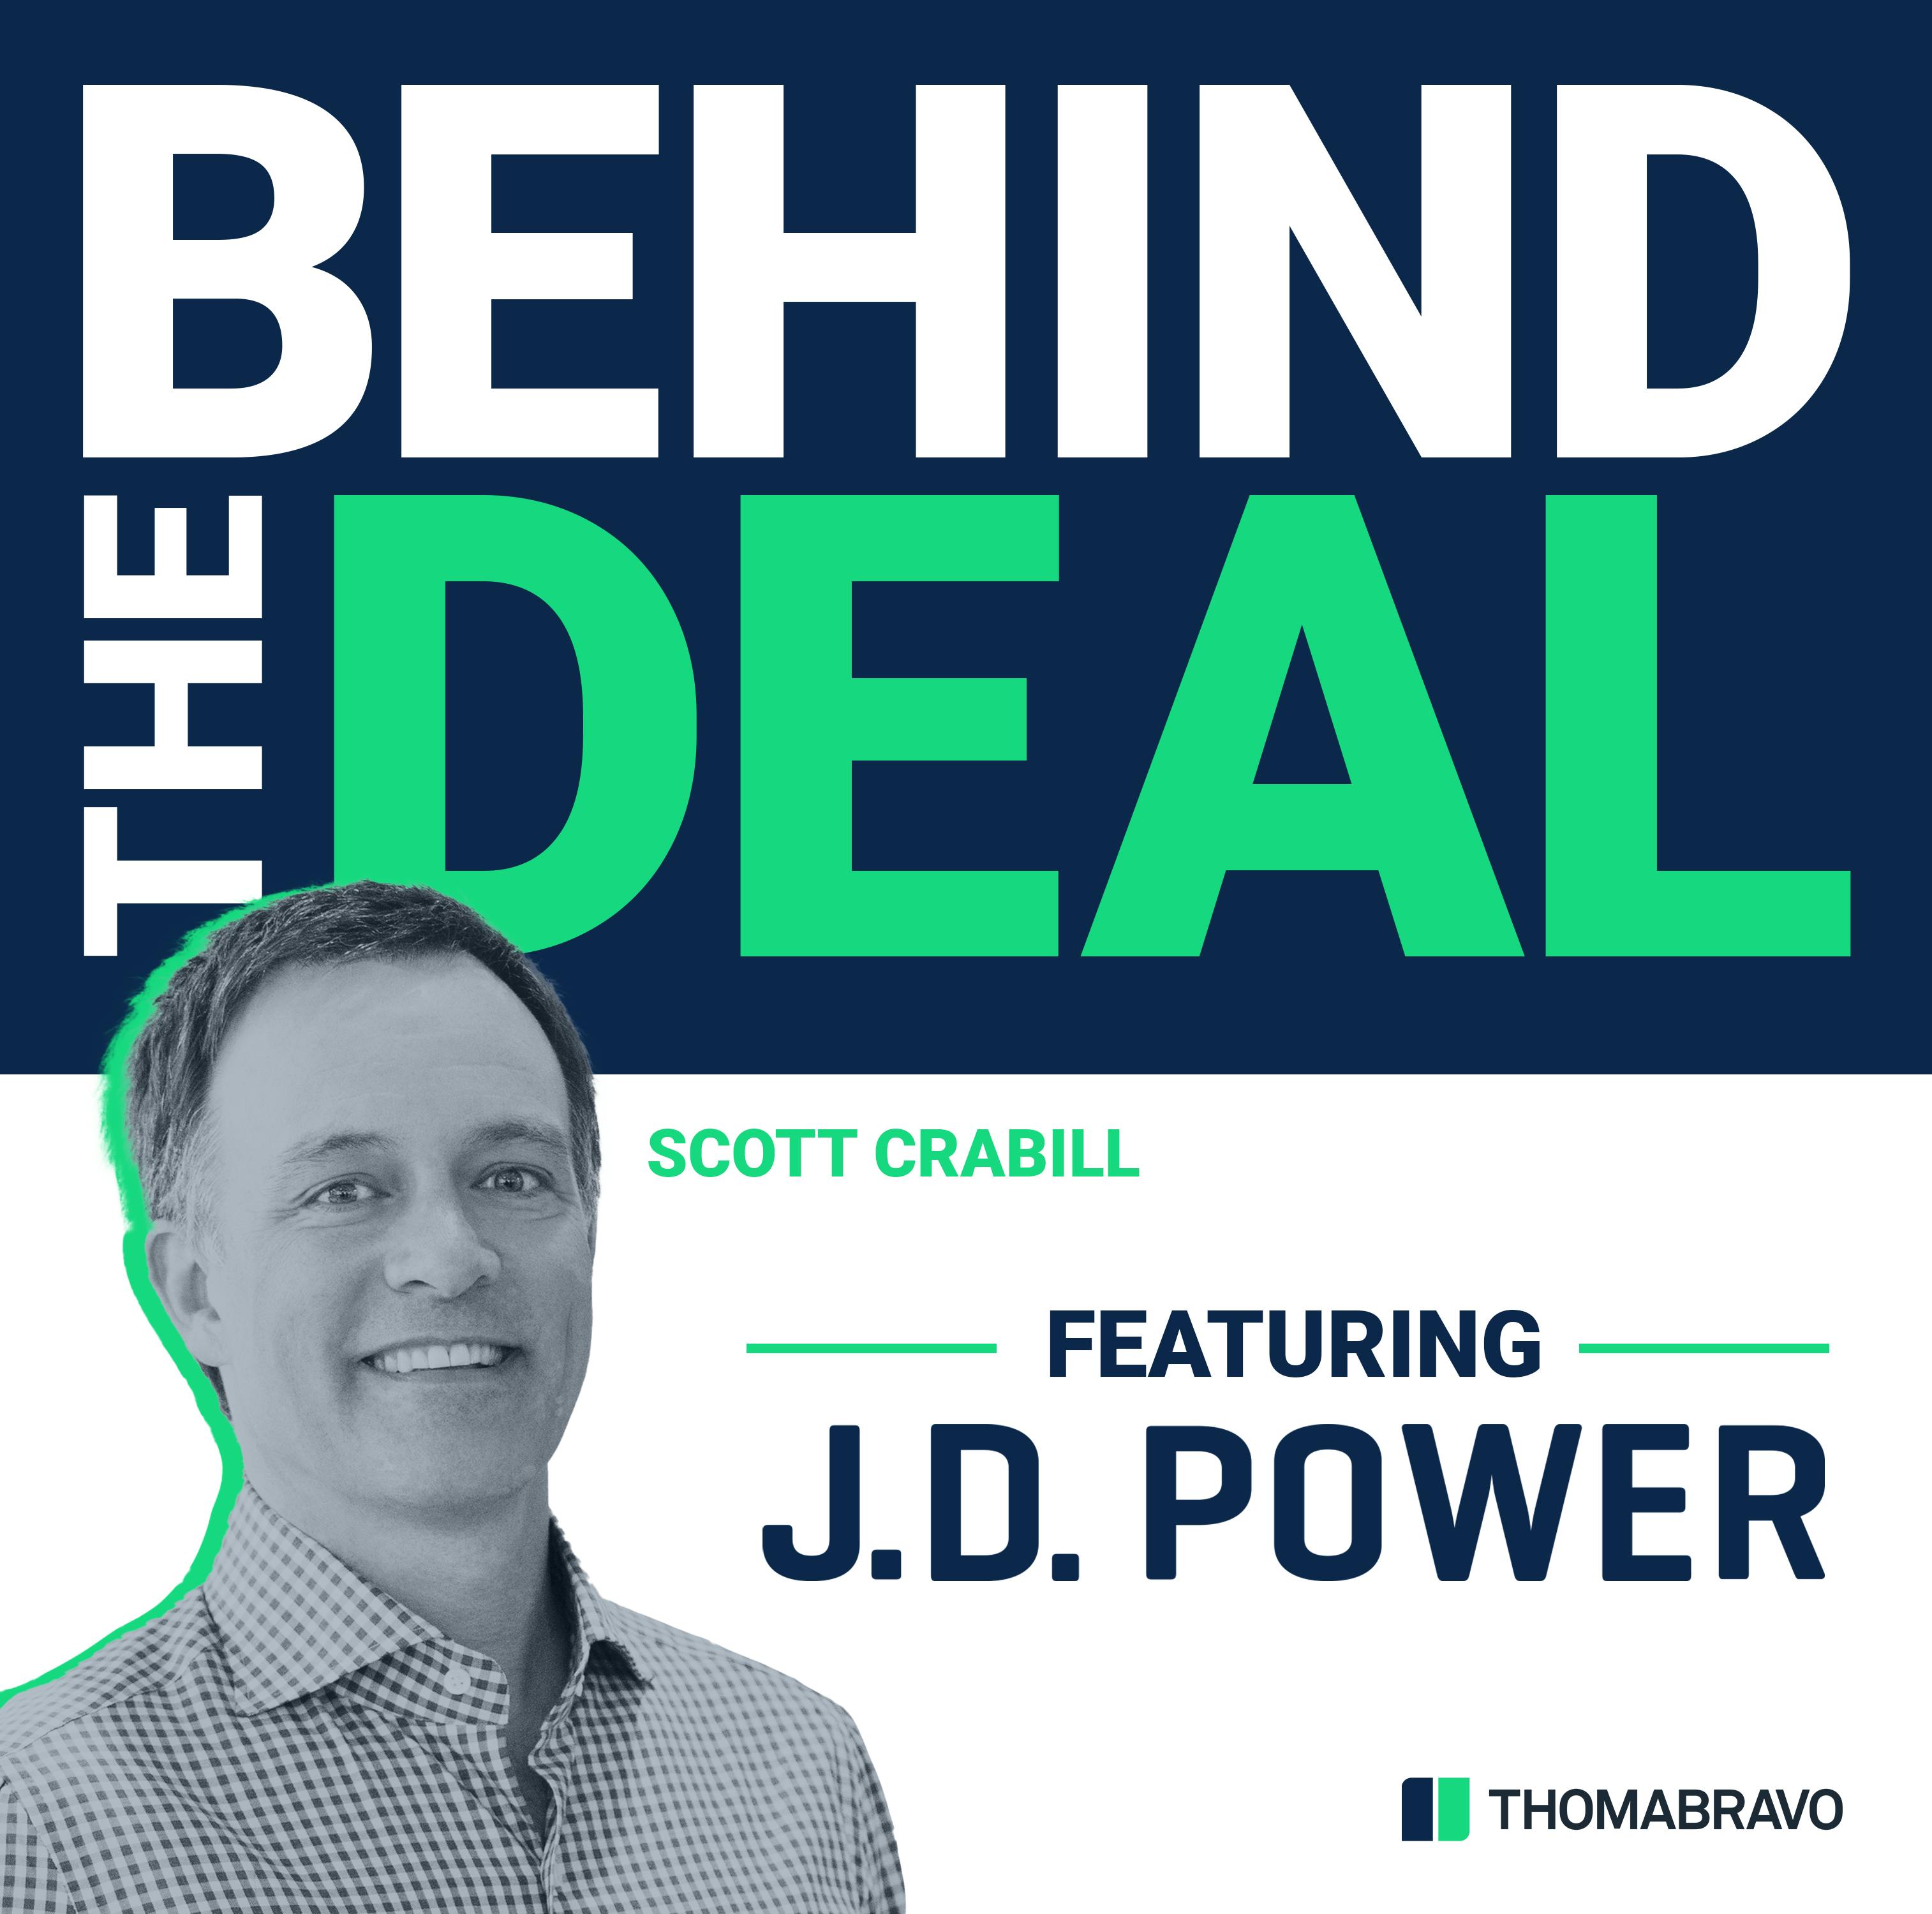 How J.D. Power Uses Data to Drive the Auto Industry Forward by Thoma Bravo | Pod People